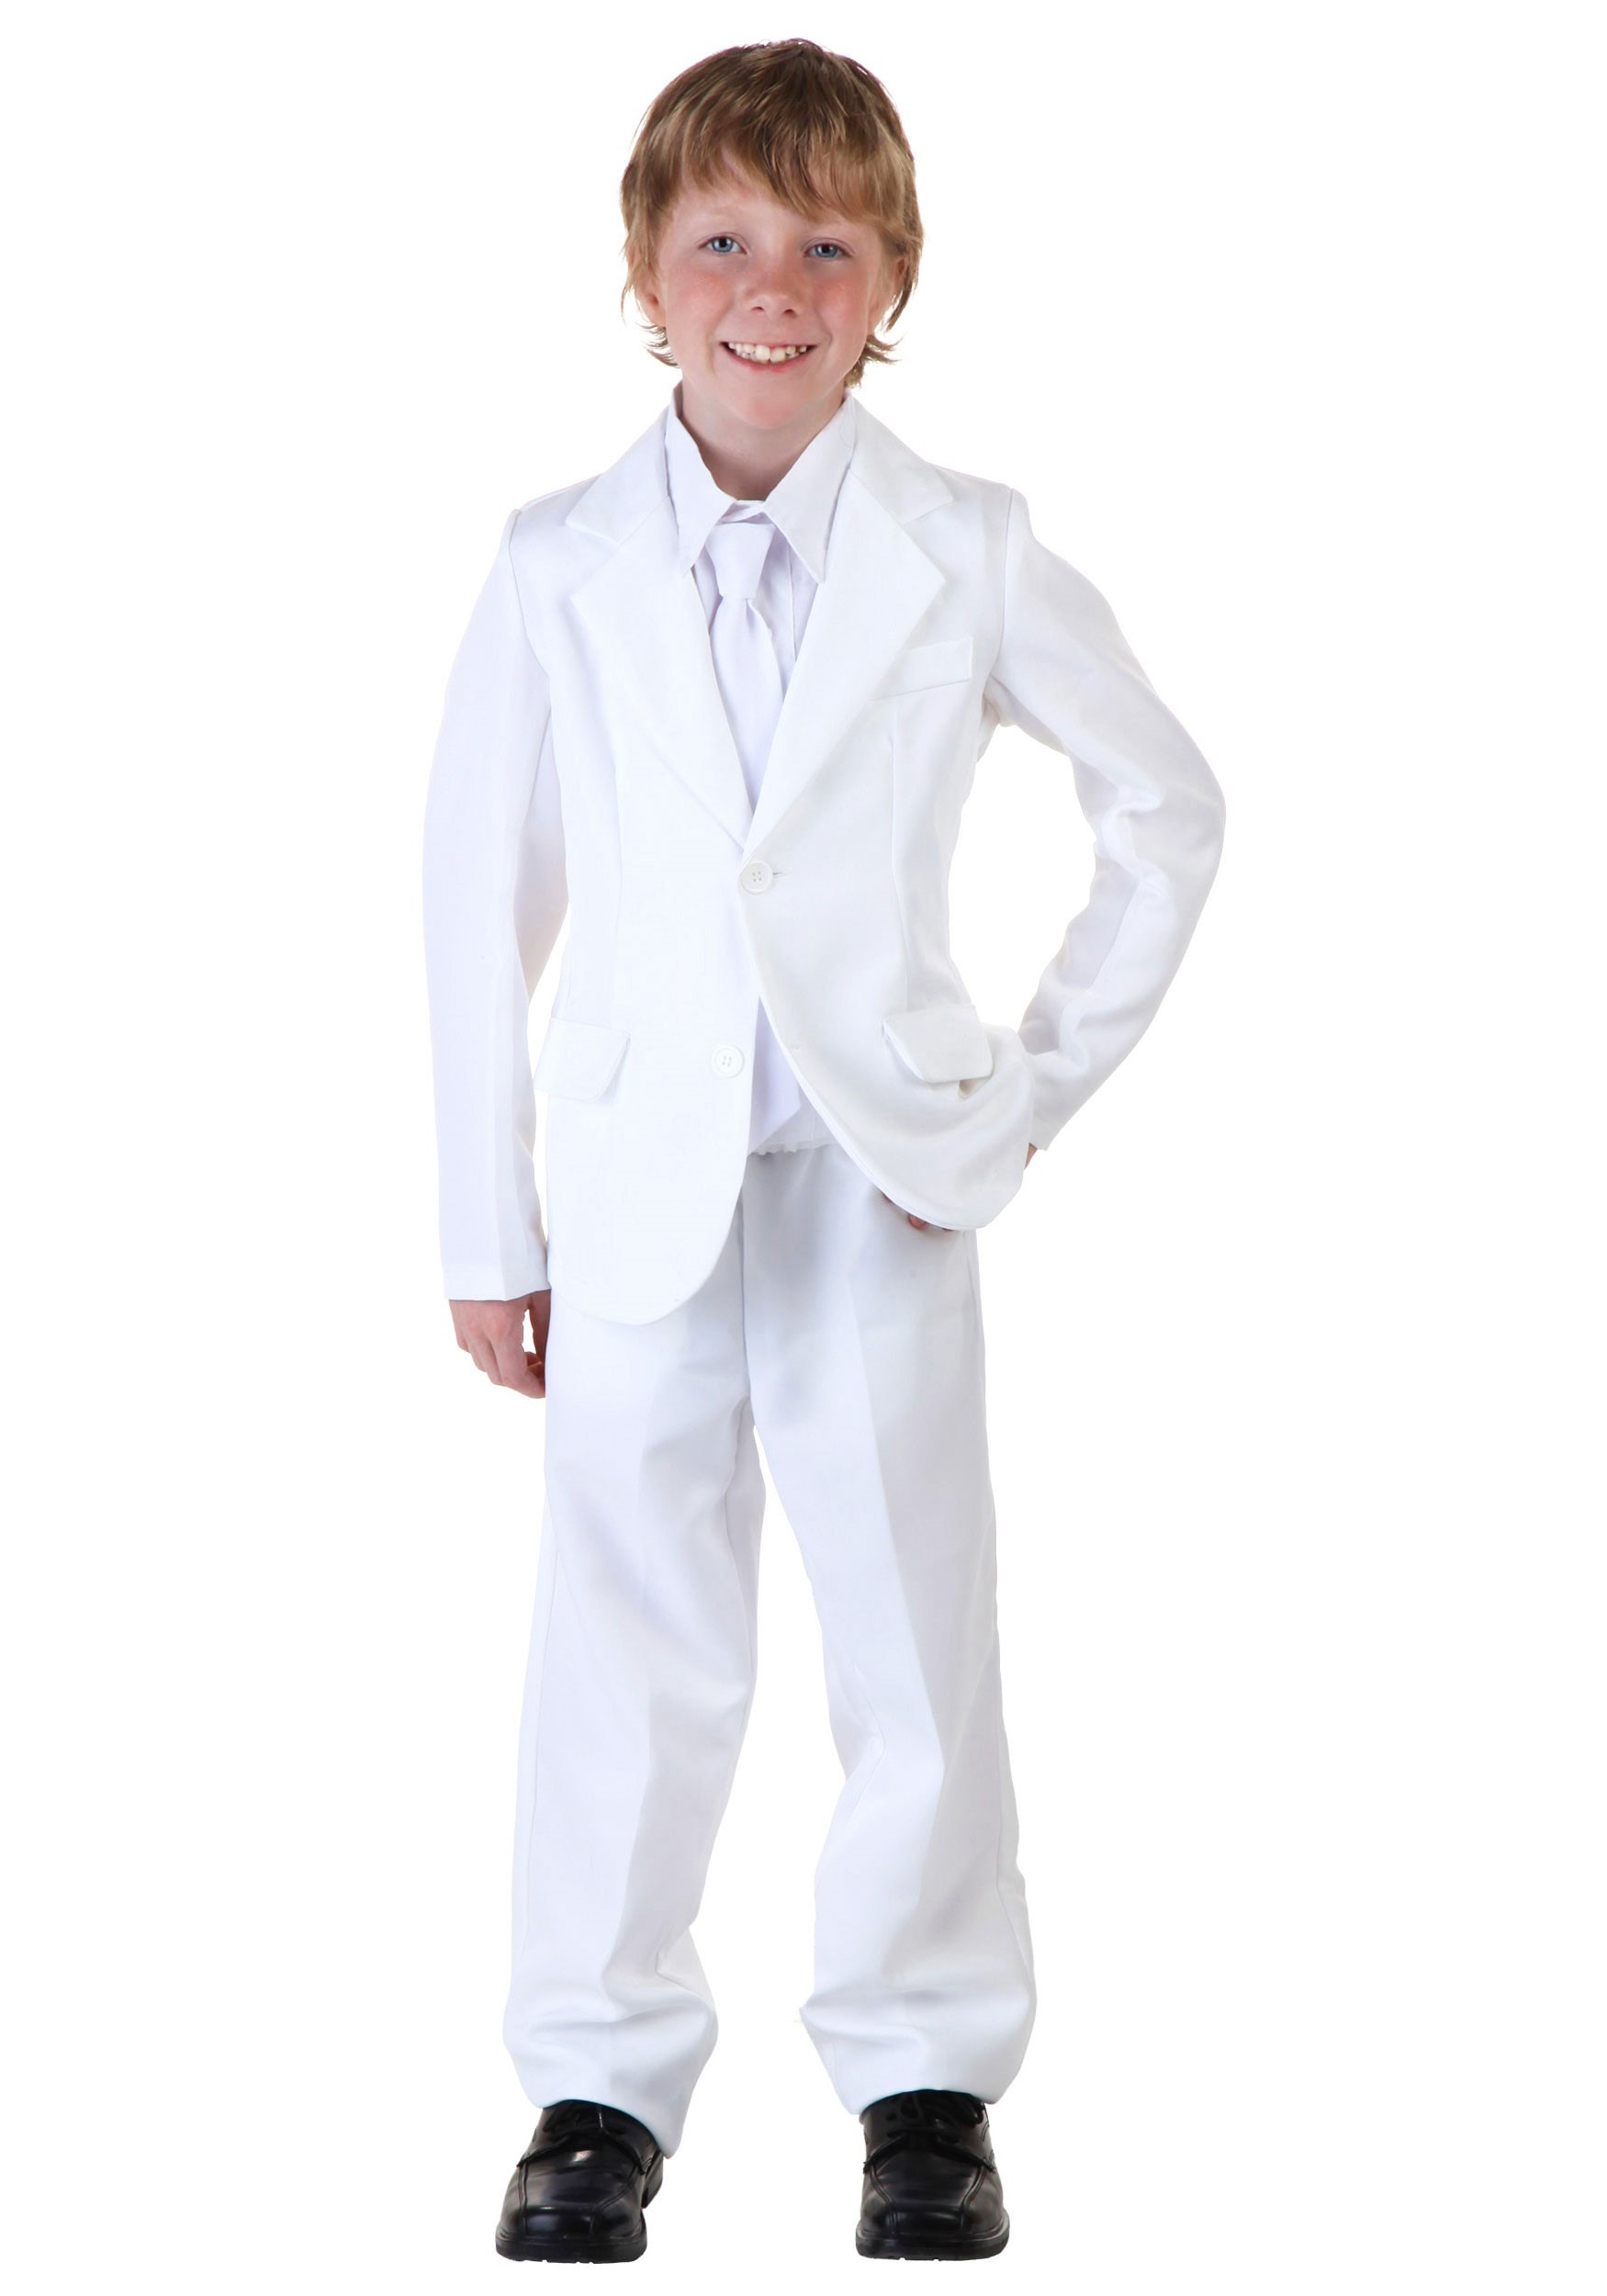 Photos - Fancy Dress FUN Costumes White Suit Costume for Kids White FUN1111CHWH